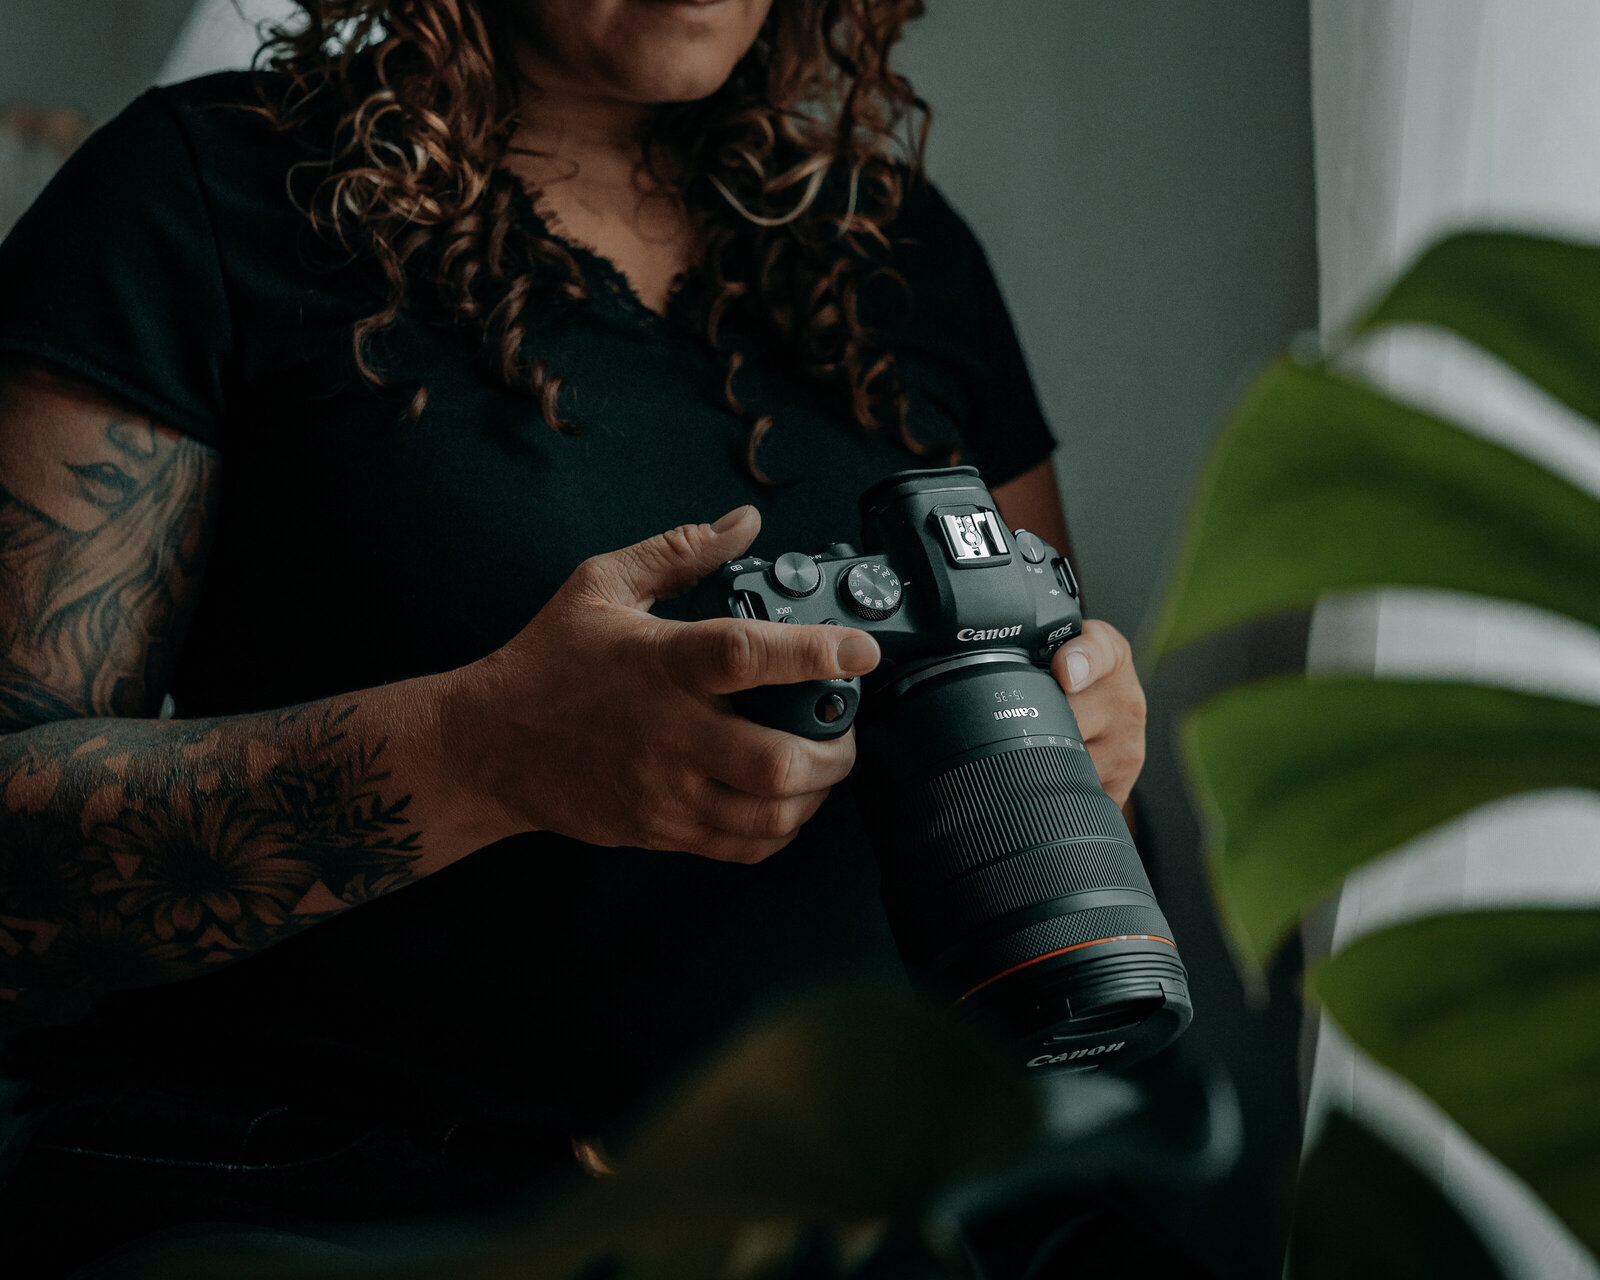 Photographers who primarily shoot on canon